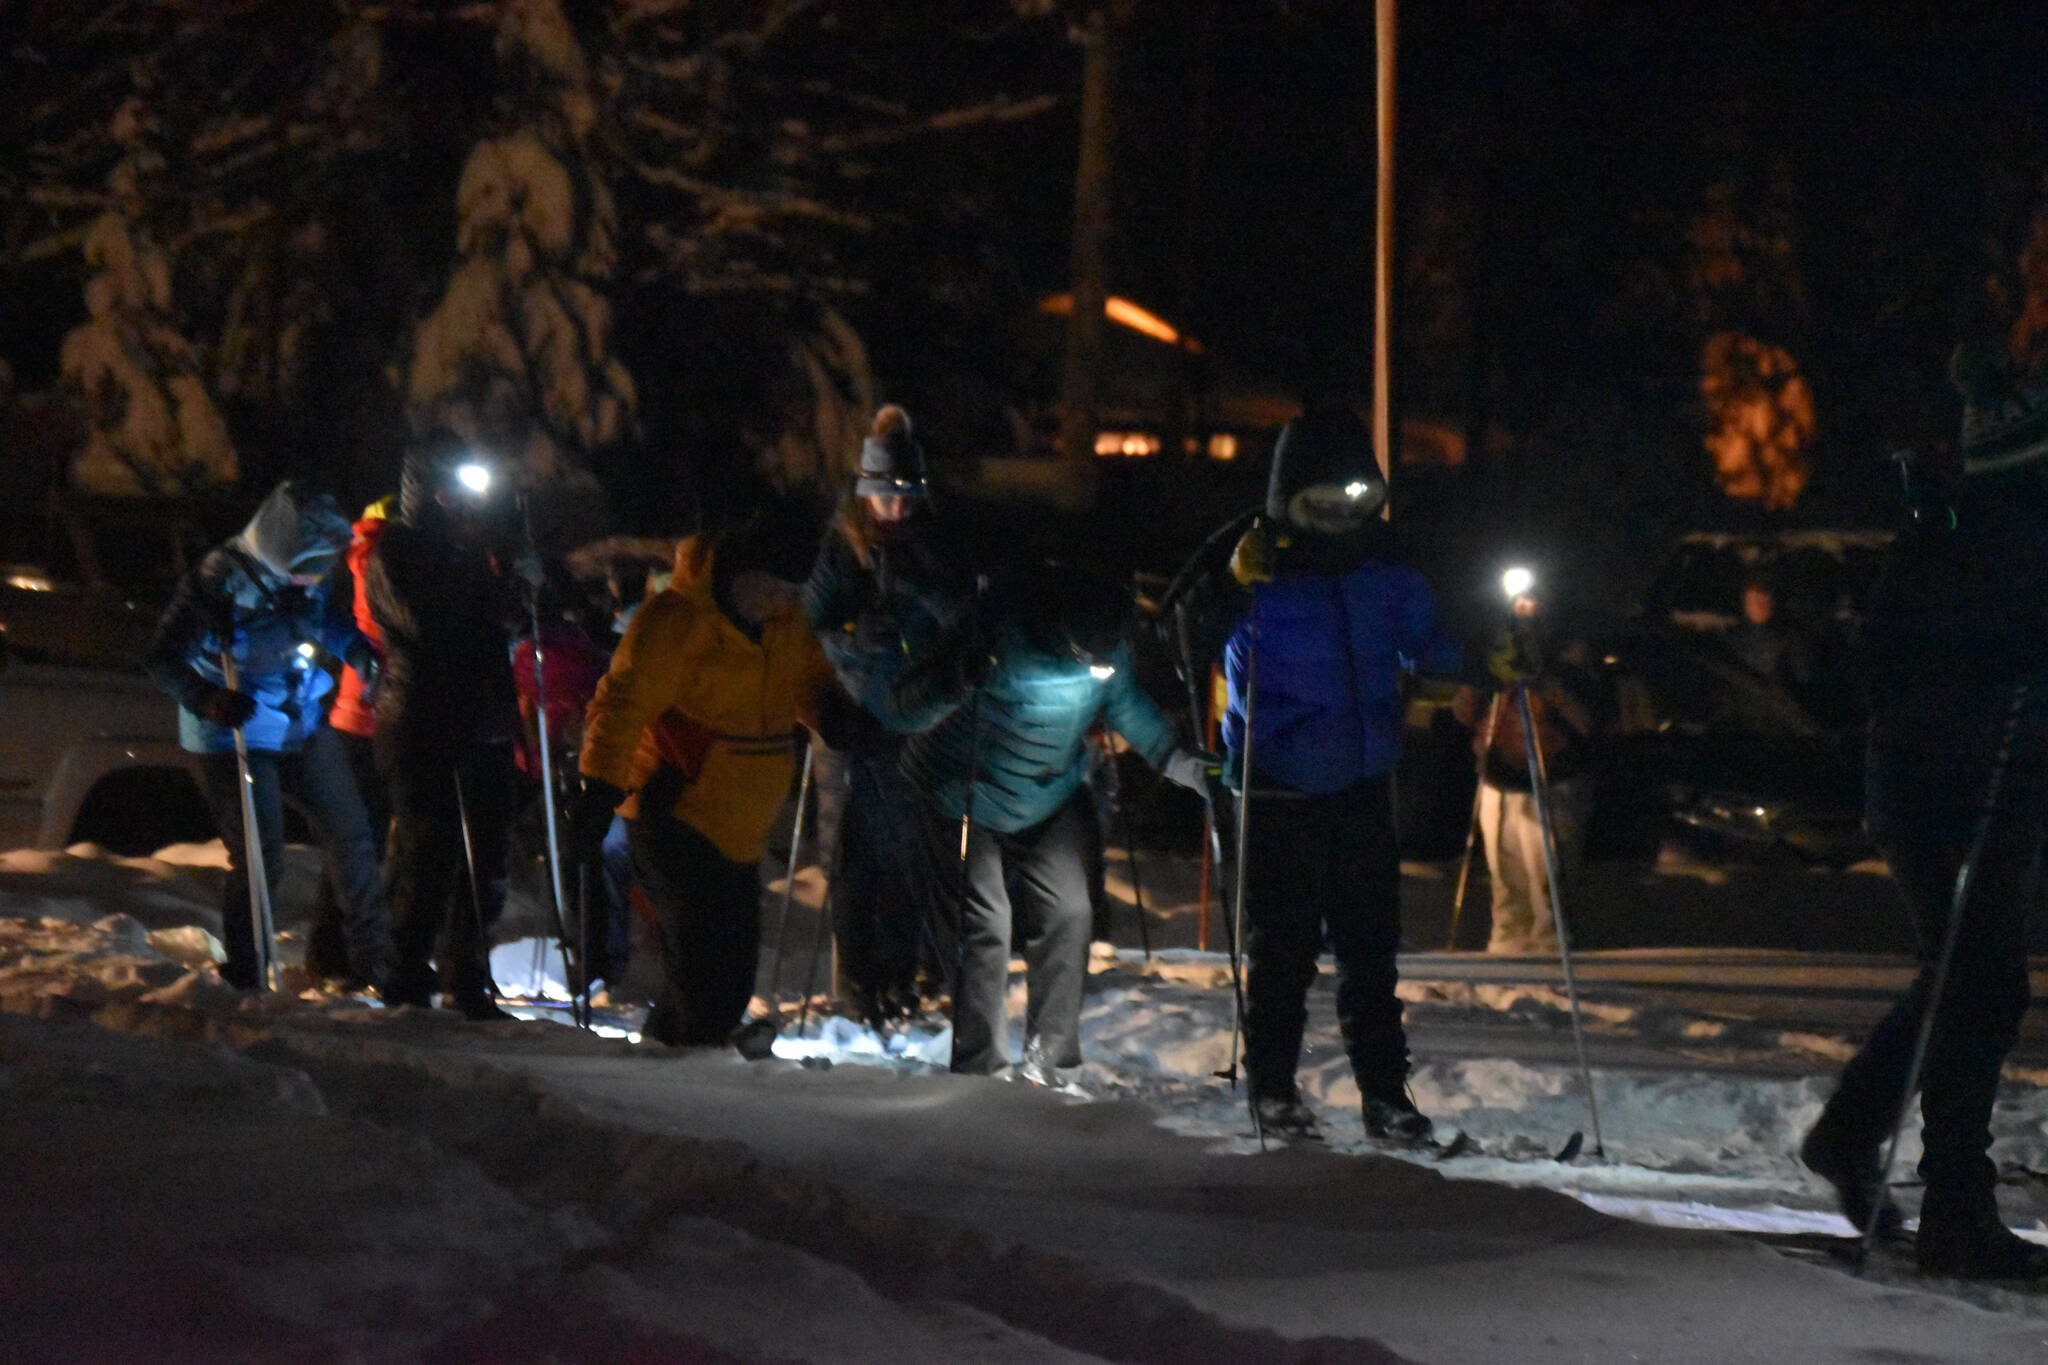 Skiiers ready for the start during StarLight StarBright: A Winter Solstice Ski Event on Wednesday, Dec. 21, 2022 at the Kenai Golf Course in Kenai, Alaska.